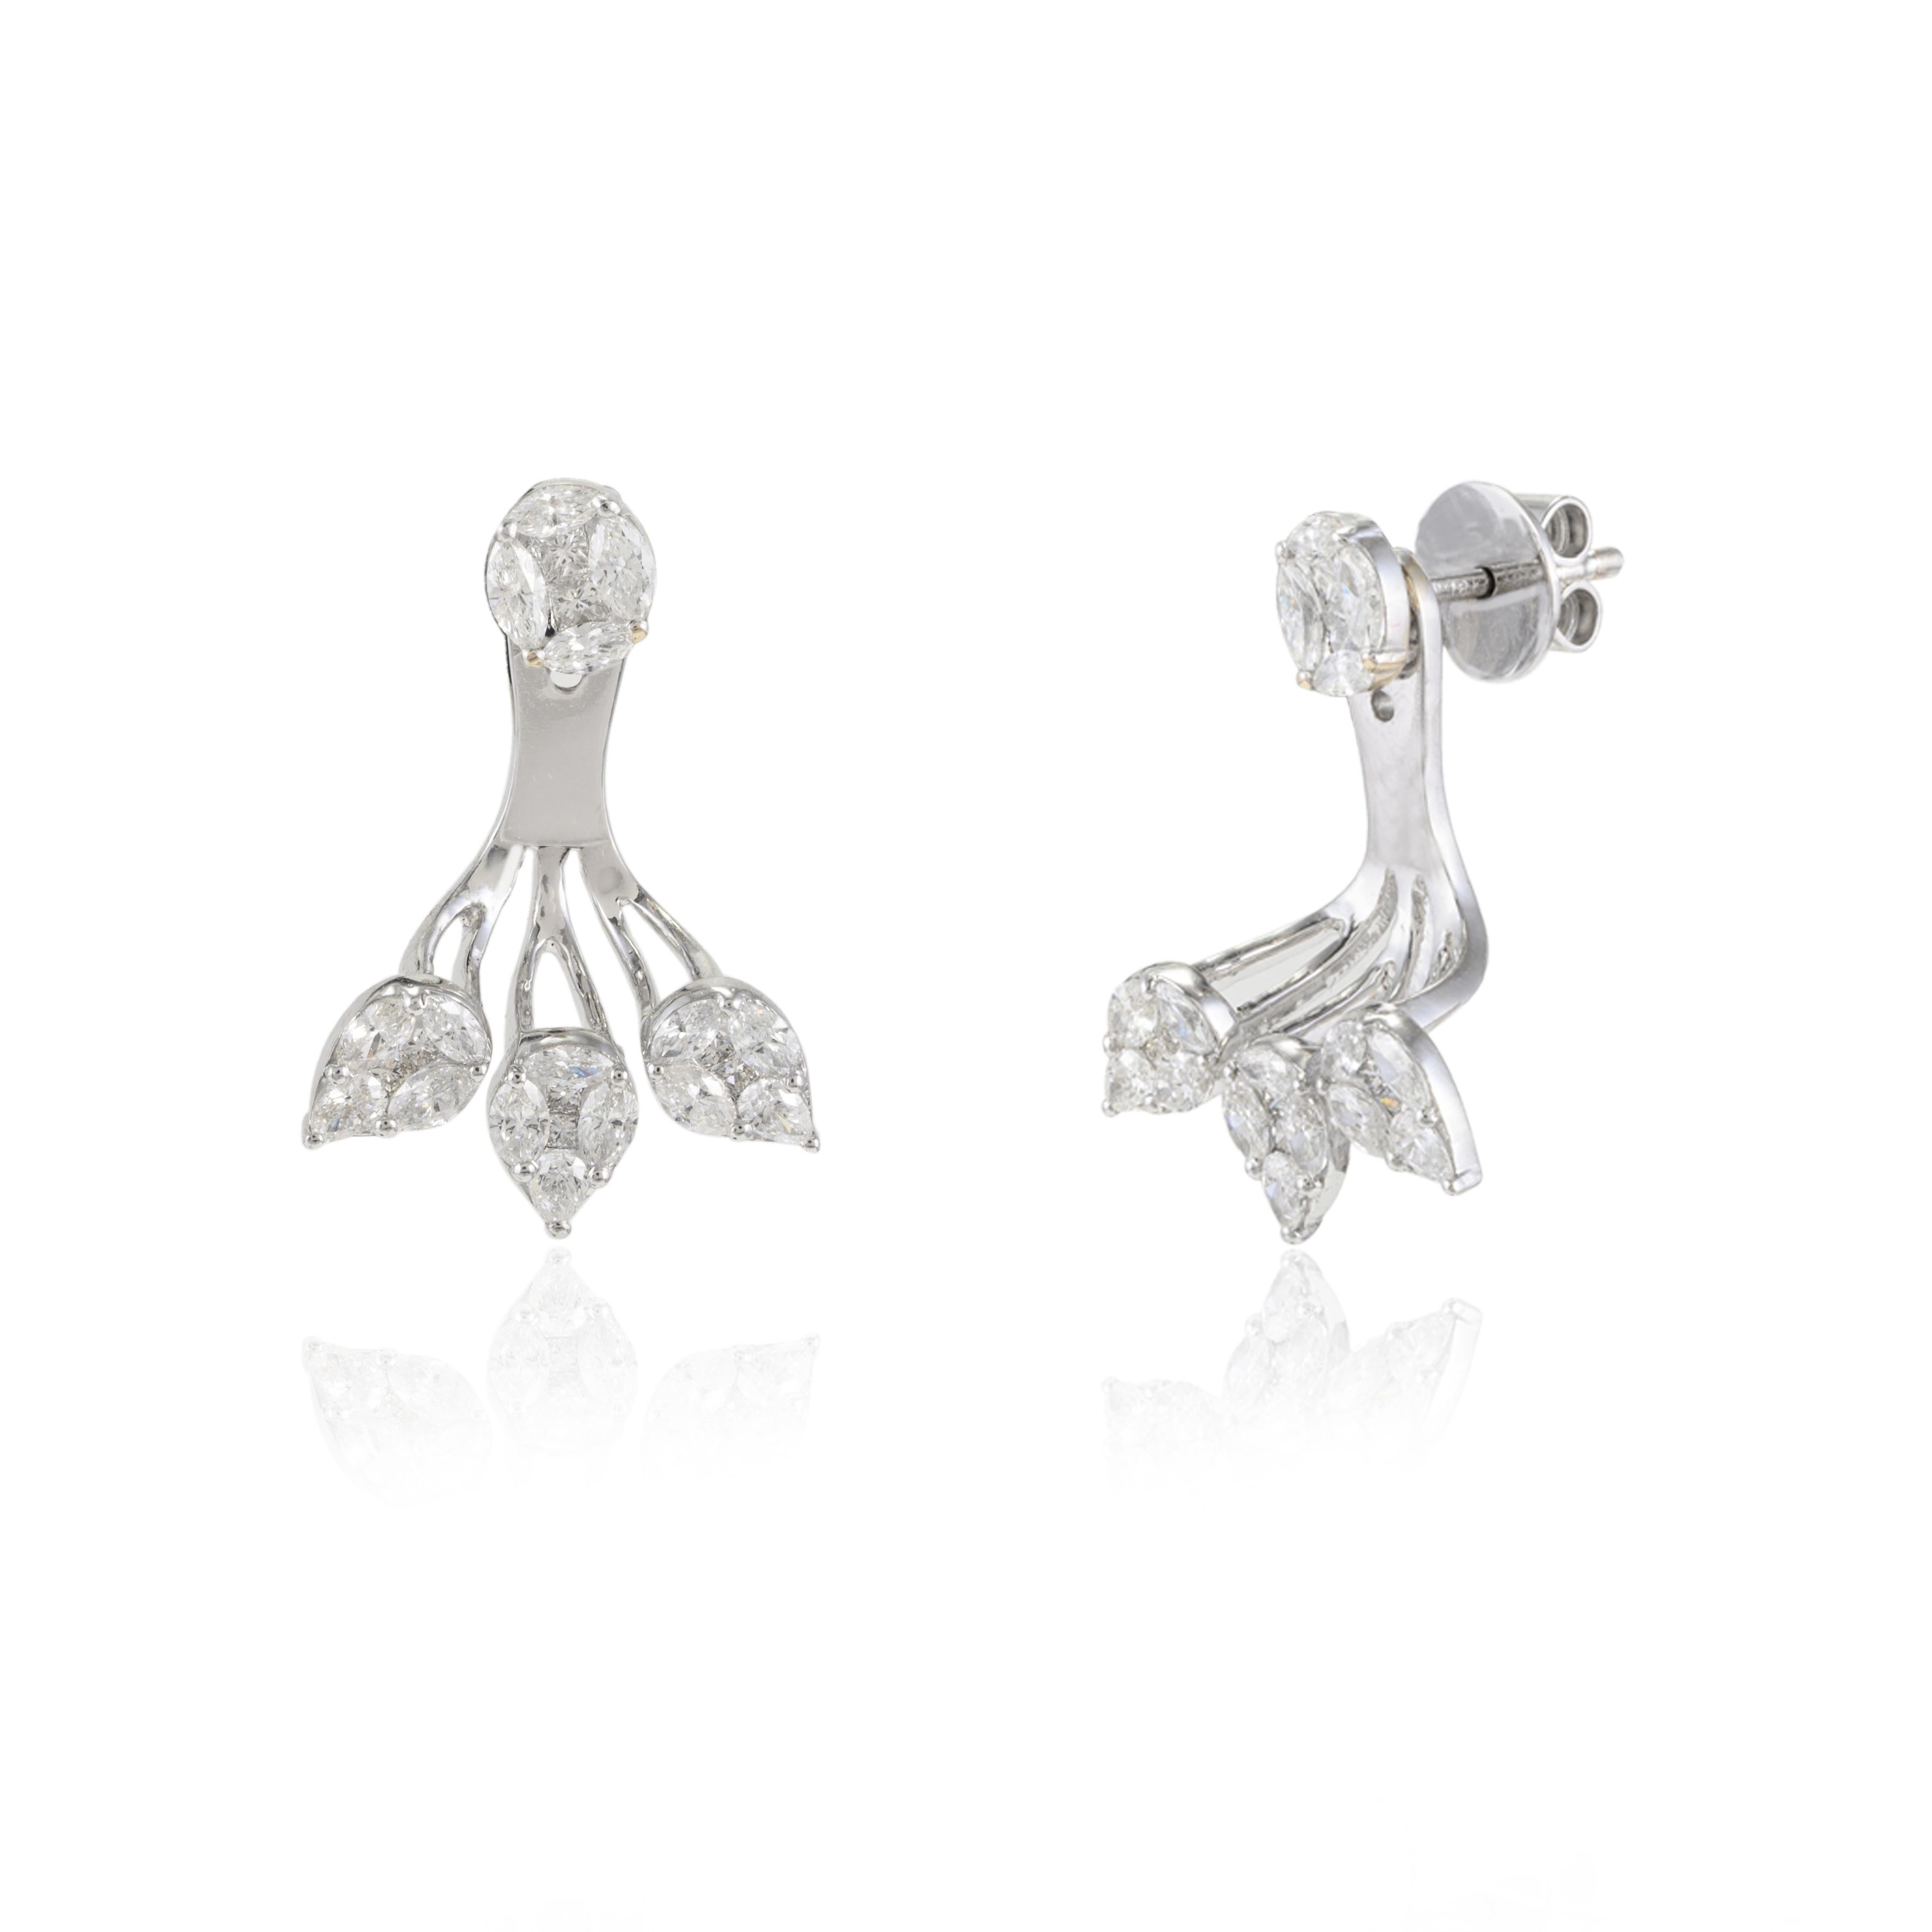 Modern Unique 1.34 Carat Natural Diamond Ear Jacket Earrings in 18K Solid White Gold For Sale